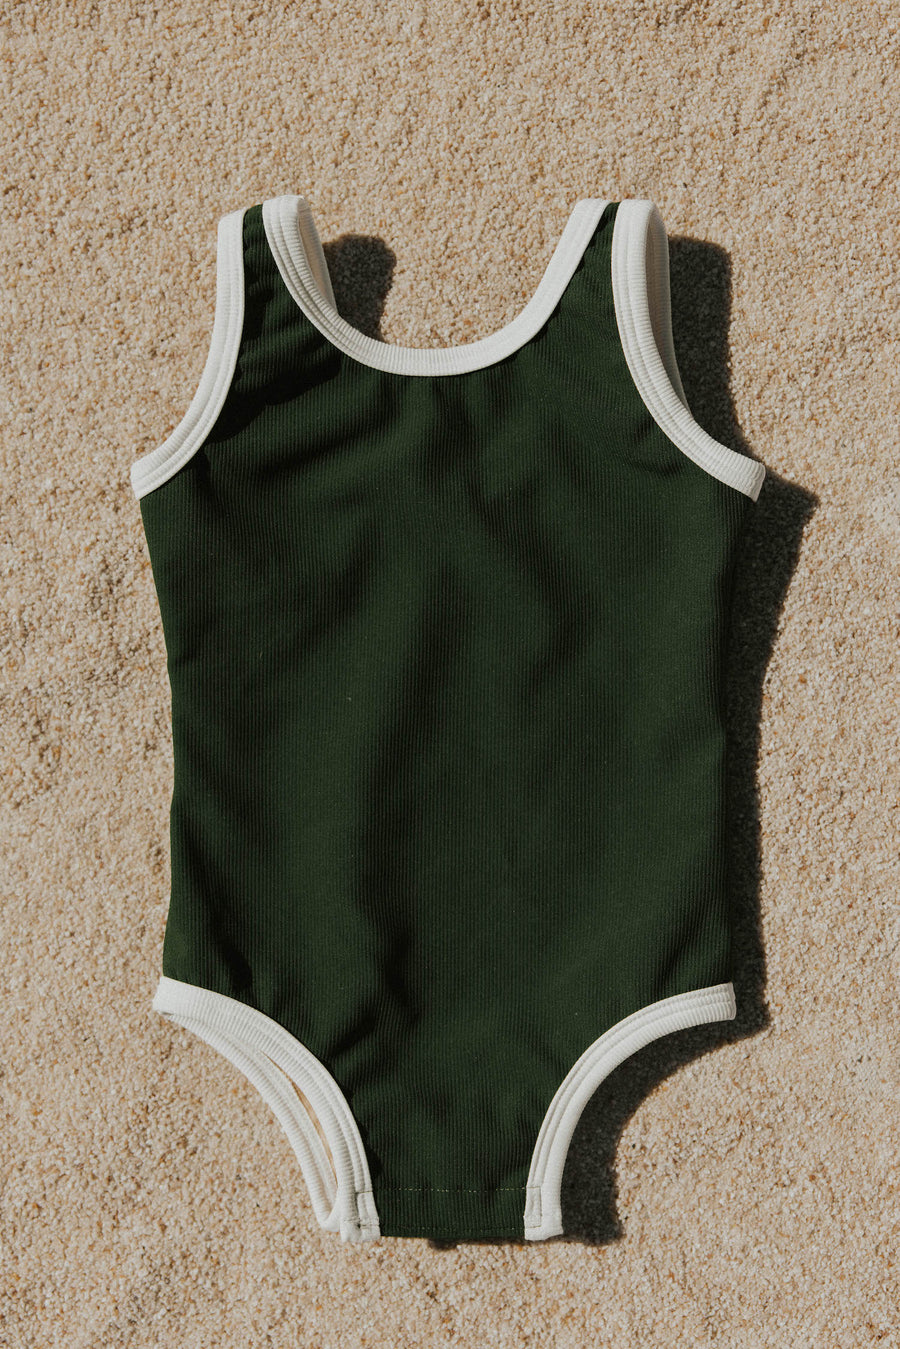 Dark Green infant and toddler girls one piece swimsuit